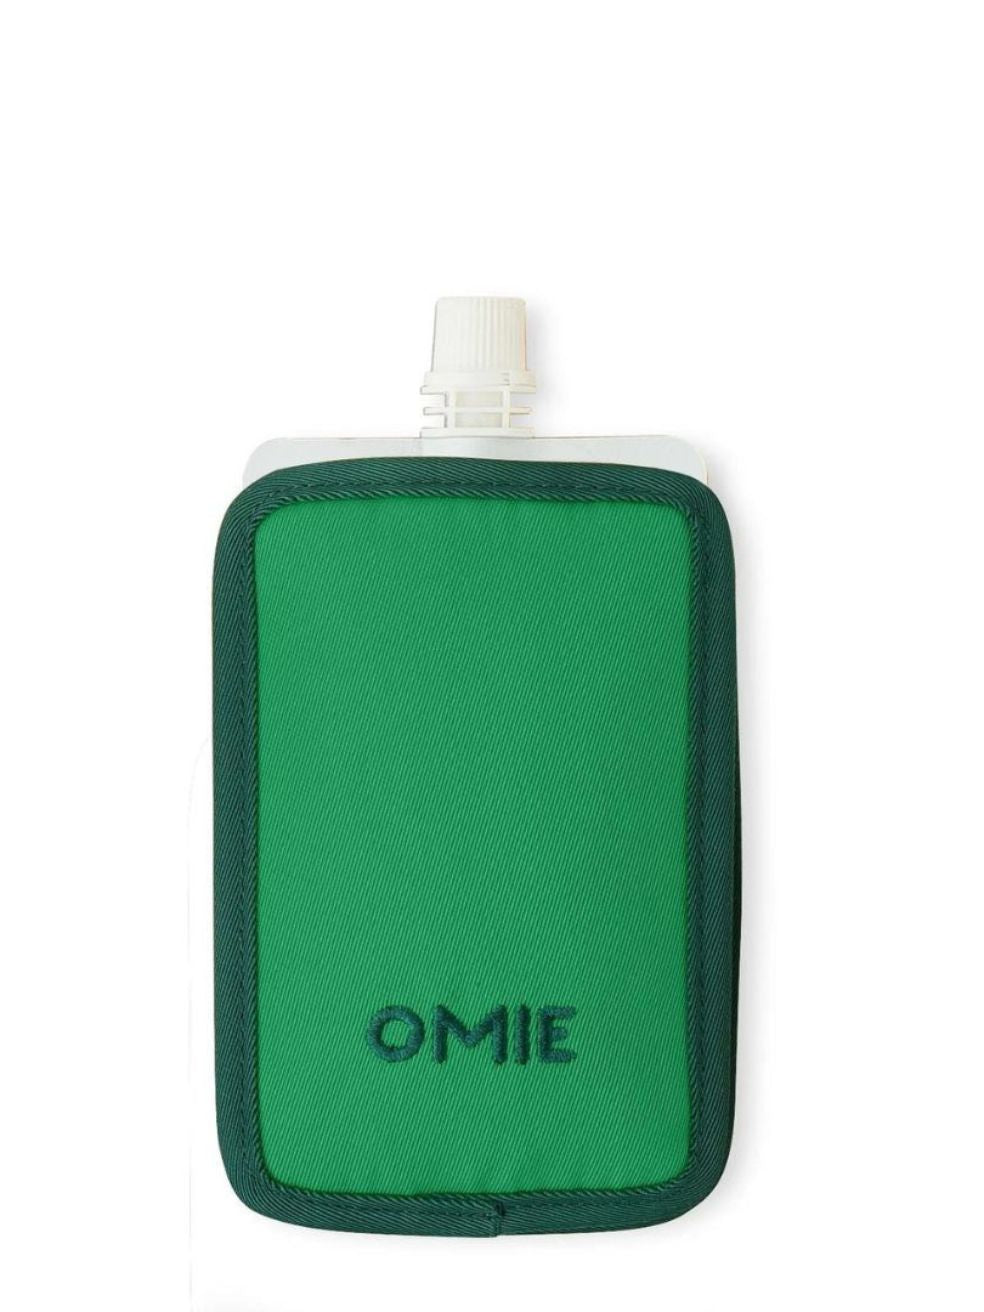 Omie Chill Cooler Punch Pouch Green